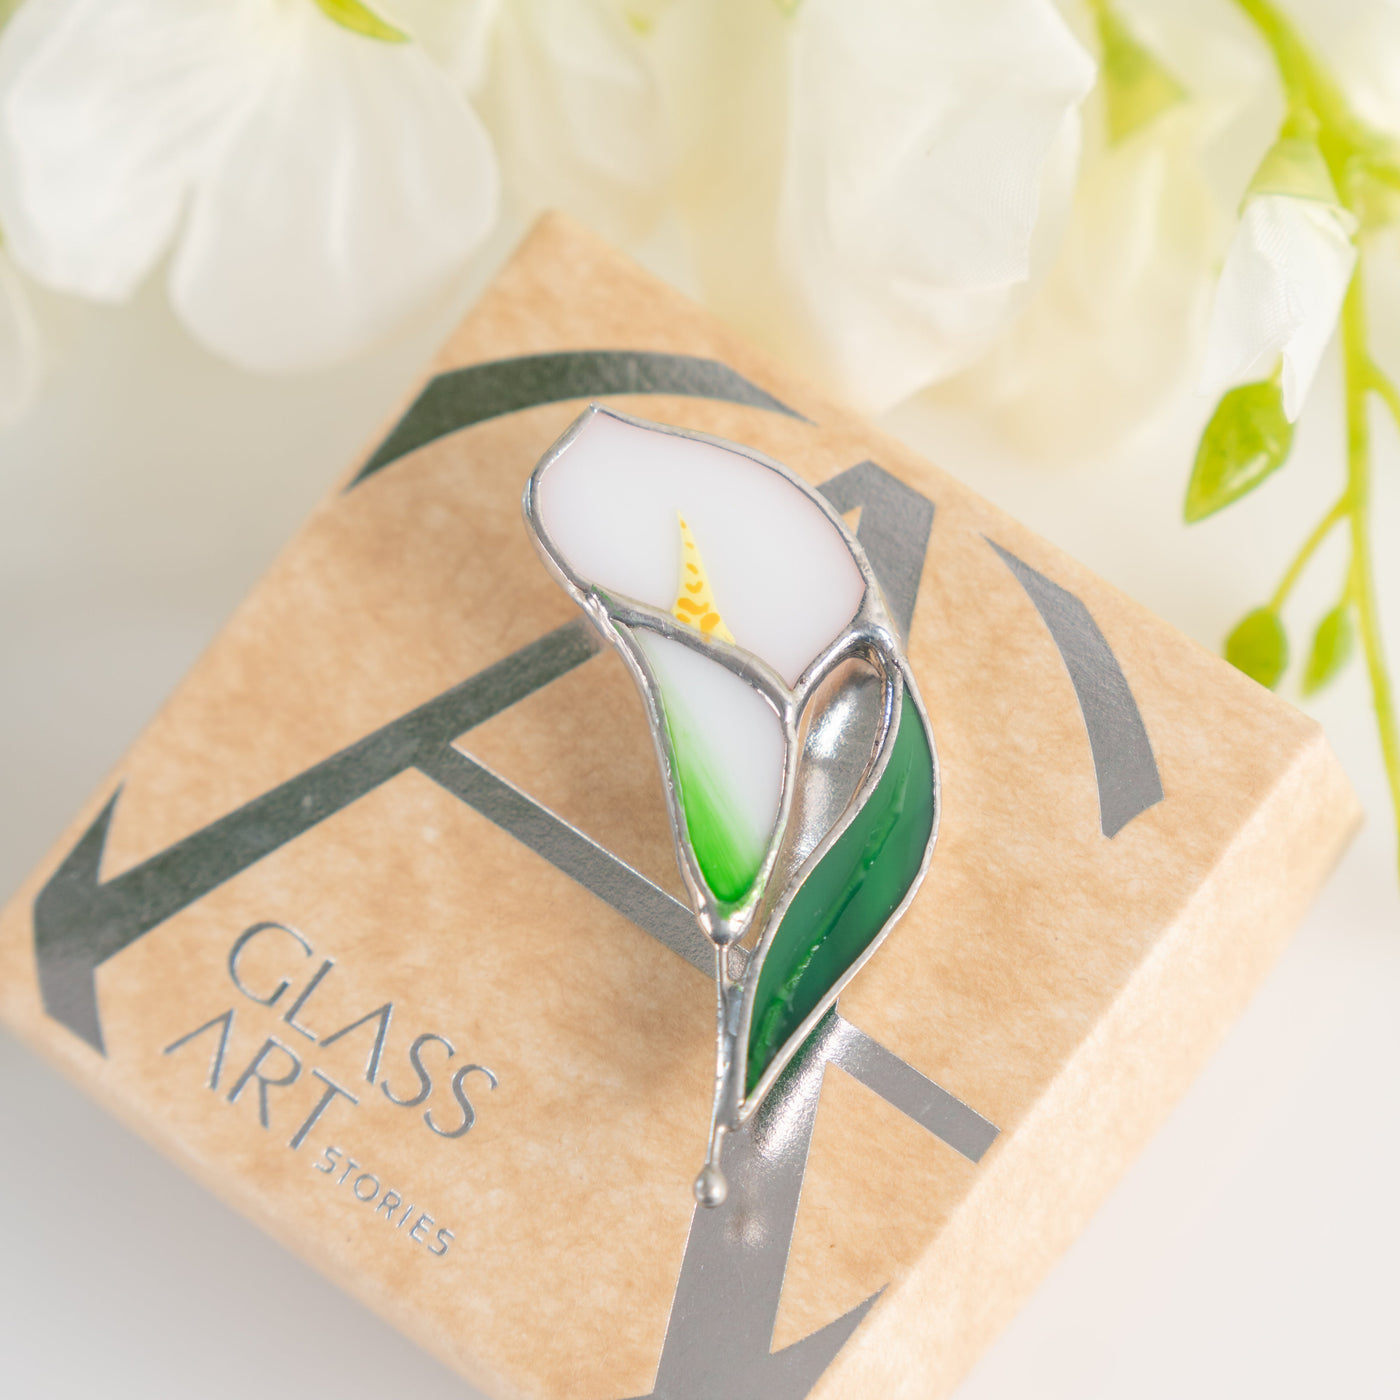 Stained glass calla pin on a brand box